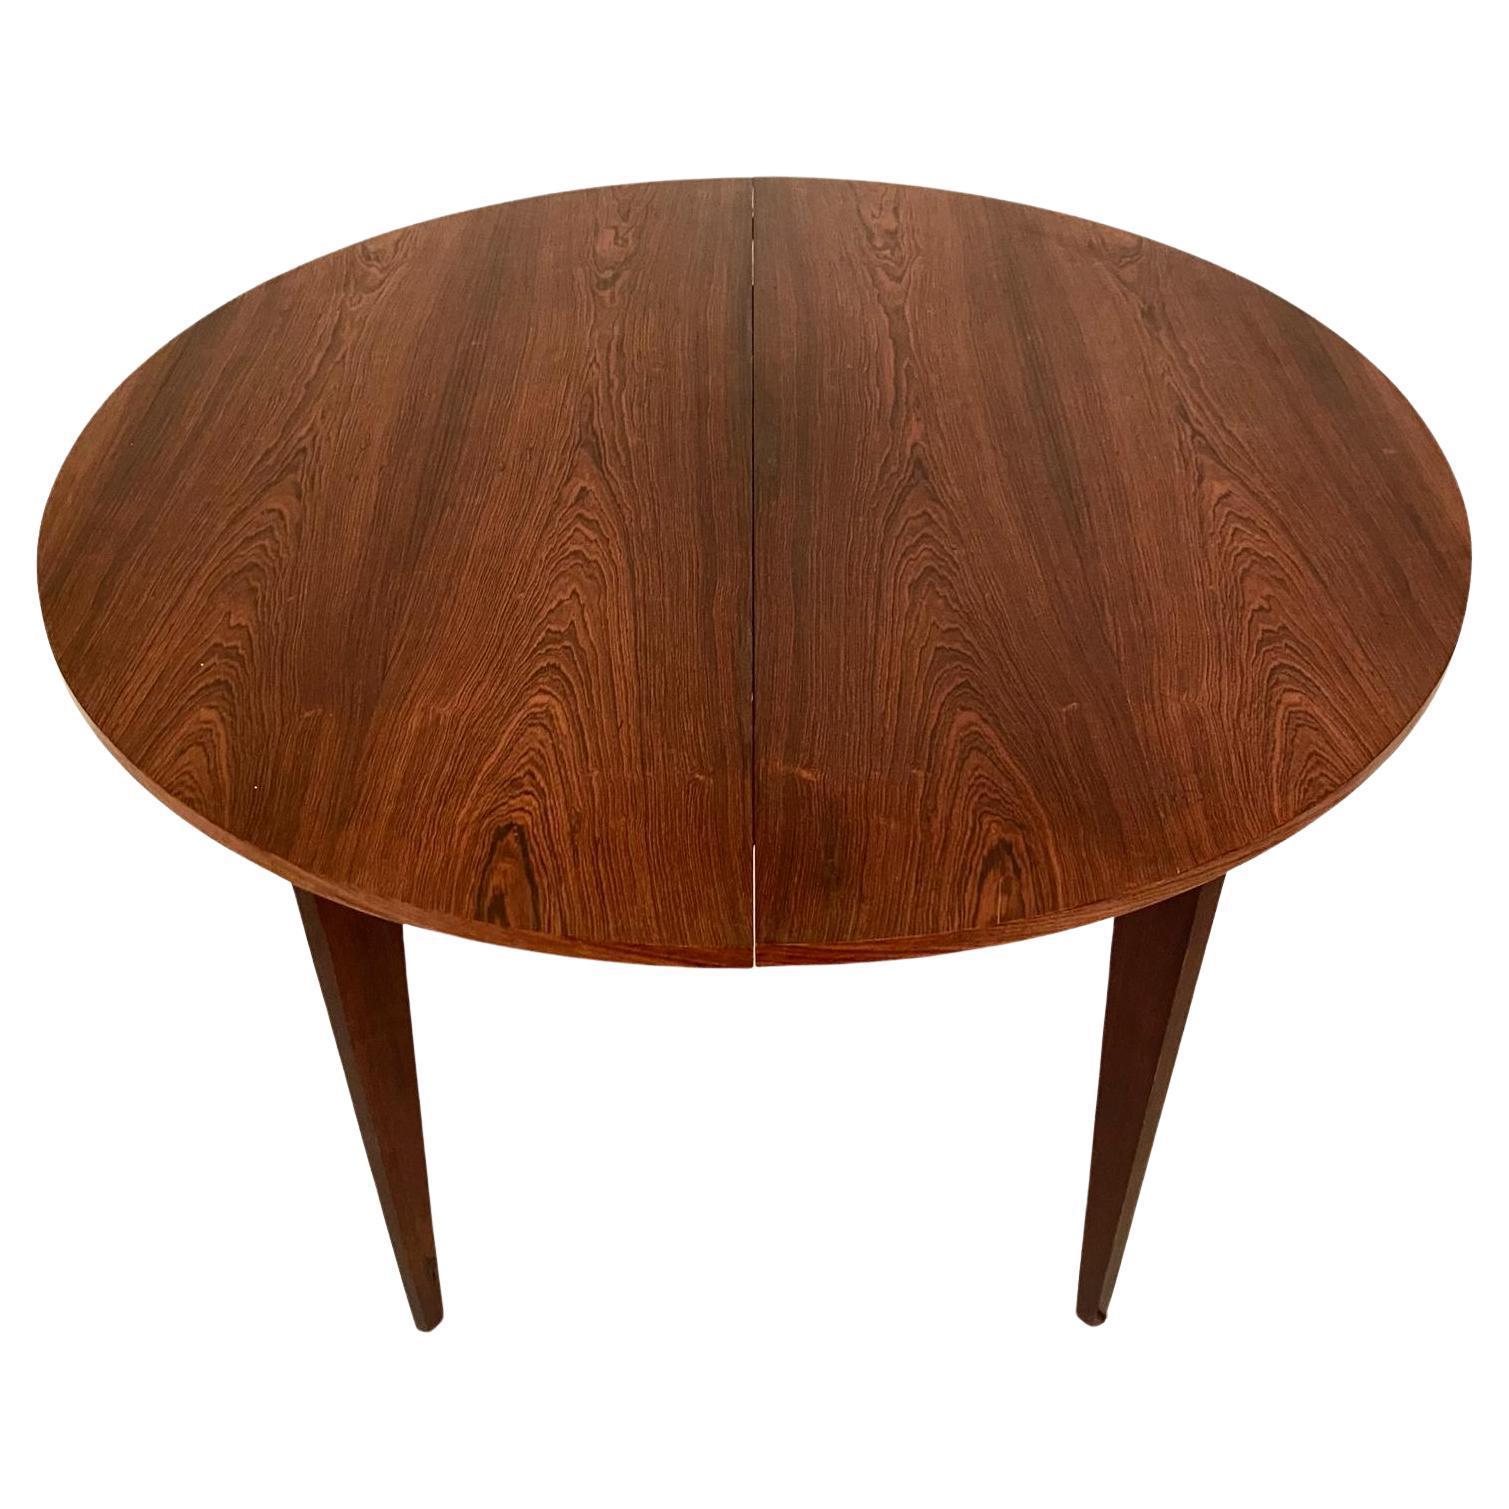 Vintage extendible dining table attributed to iconic italian company Vittorio Dassi. Manufactured in the 1960 's the table represent a fine example of Italian Mid Century design of the period. 

Beautiful walnut veneered top where wood veinings